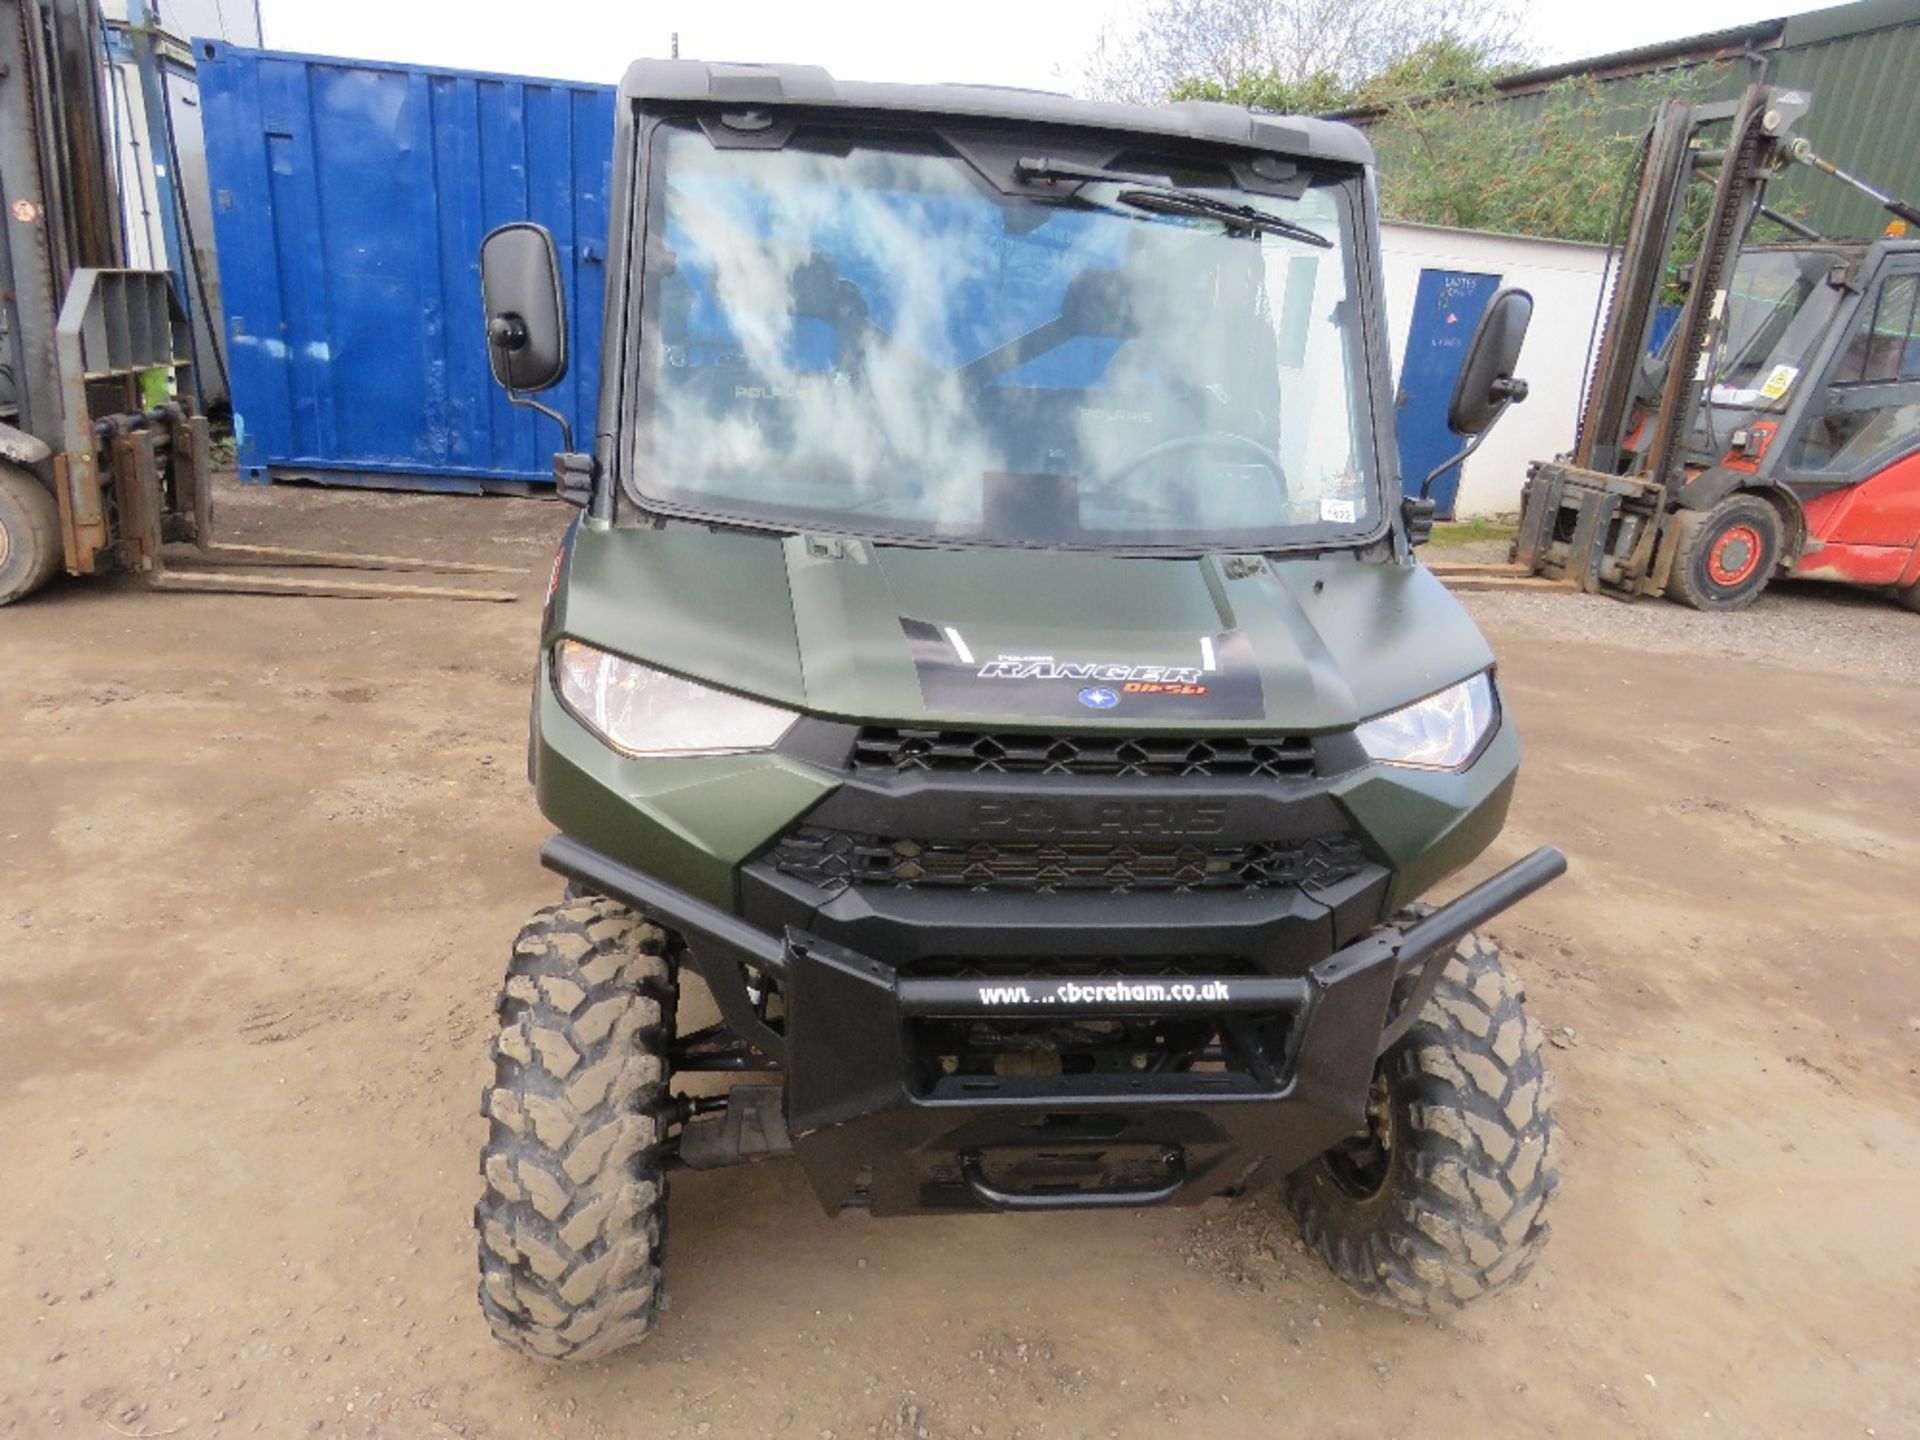 POLARIS 902 DIESEL RANGER WITH KUBOTA ENGINE, SCREEN ROOF AND BACK WINDOW. REG:EX71 RZA WITH V5, FIR - Image 2 of 12